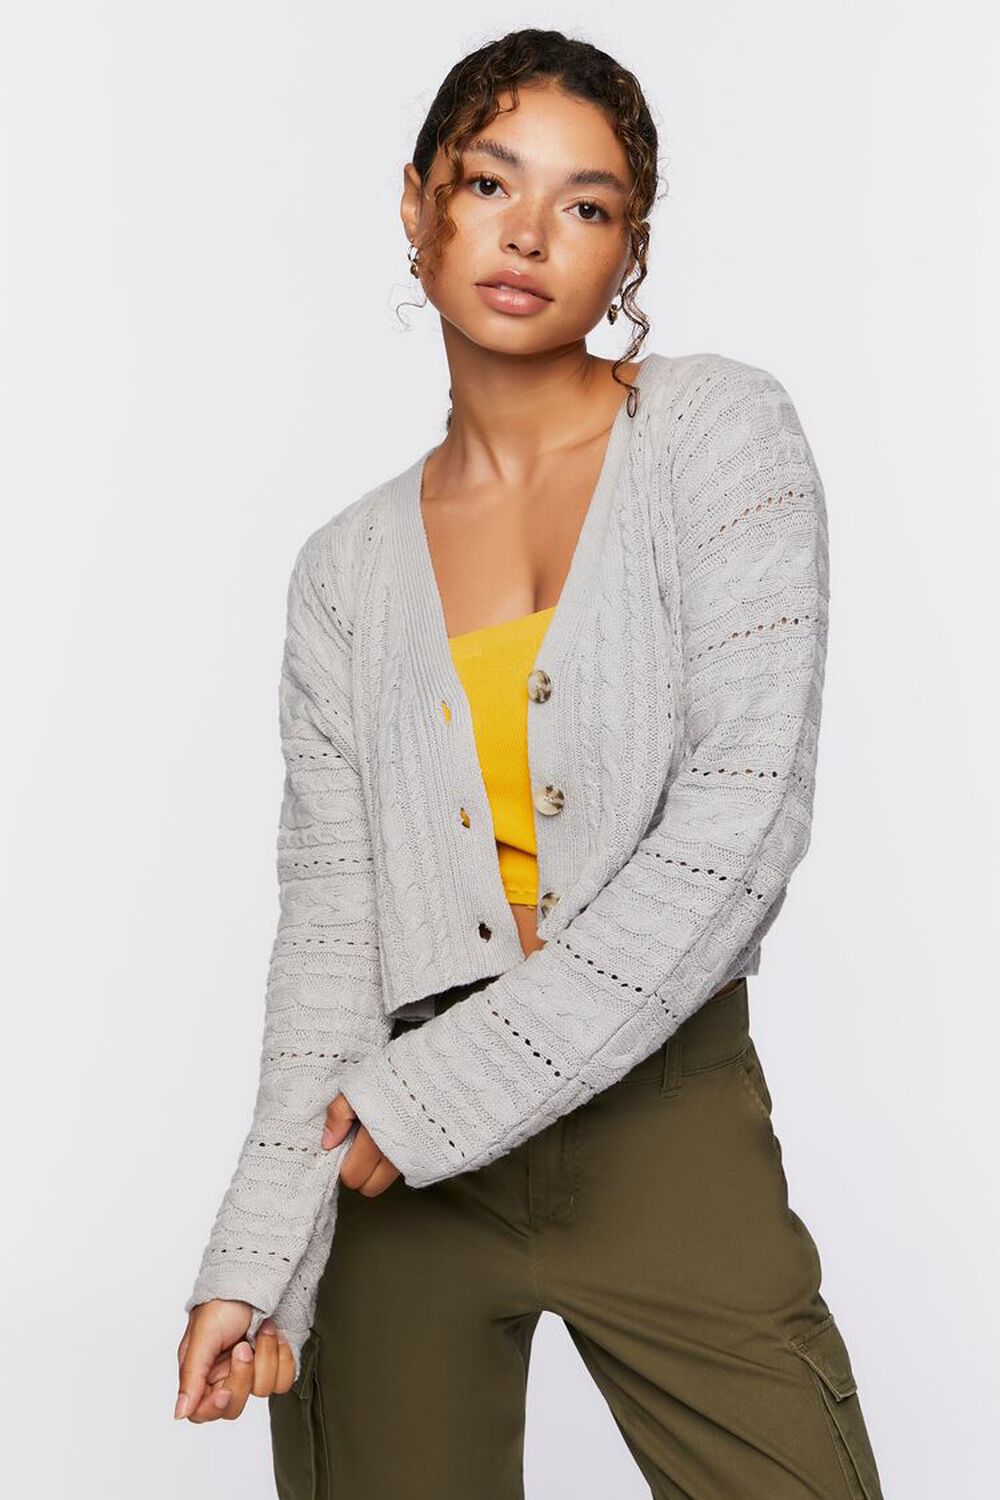 HEATHER GREY Cable Knit Cardigan Sweater, image 1